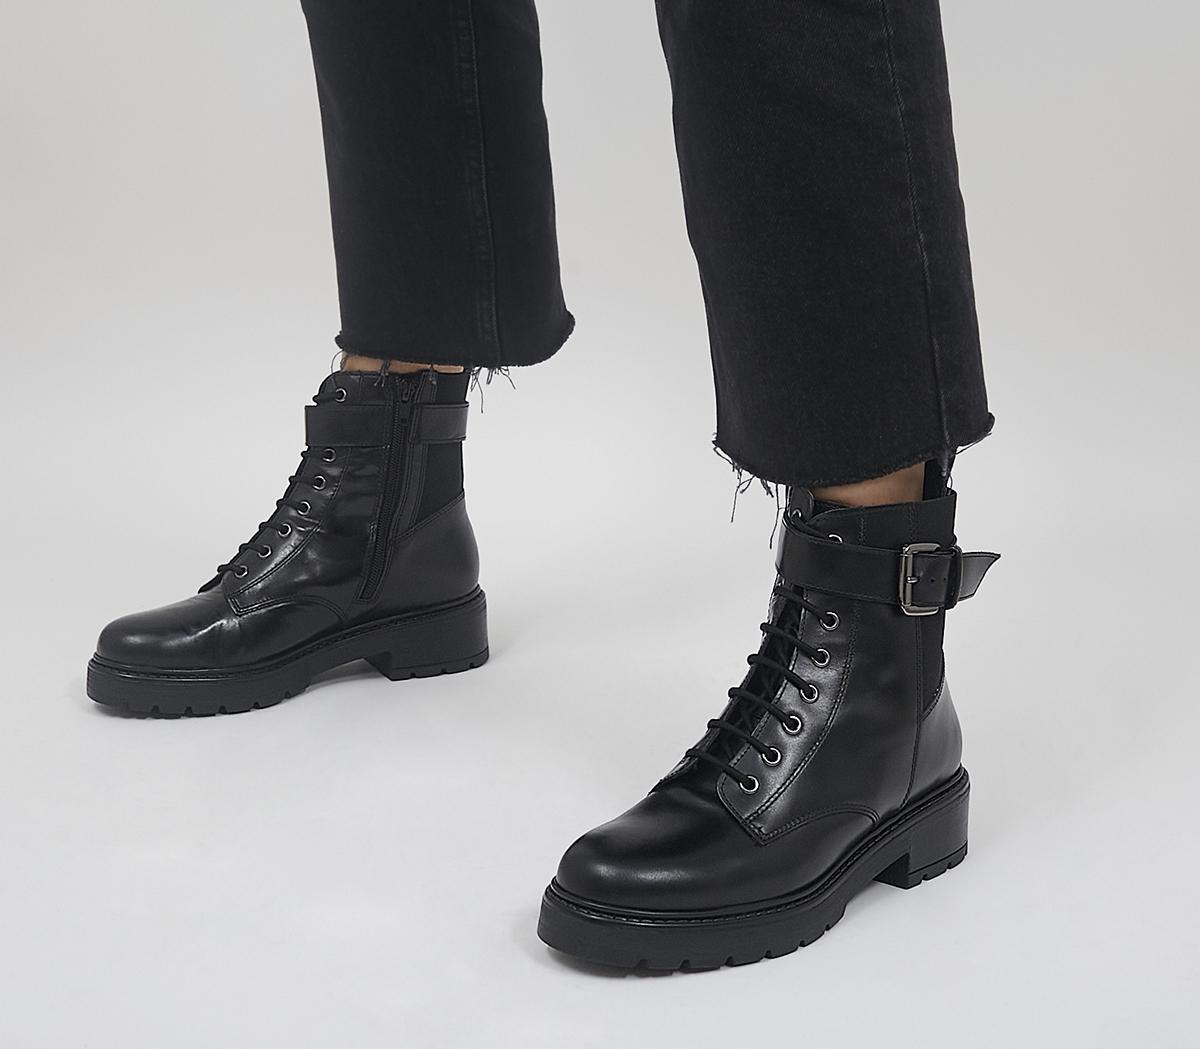 OFFICEArlette Buckle Lace Up BootsBlack Leather